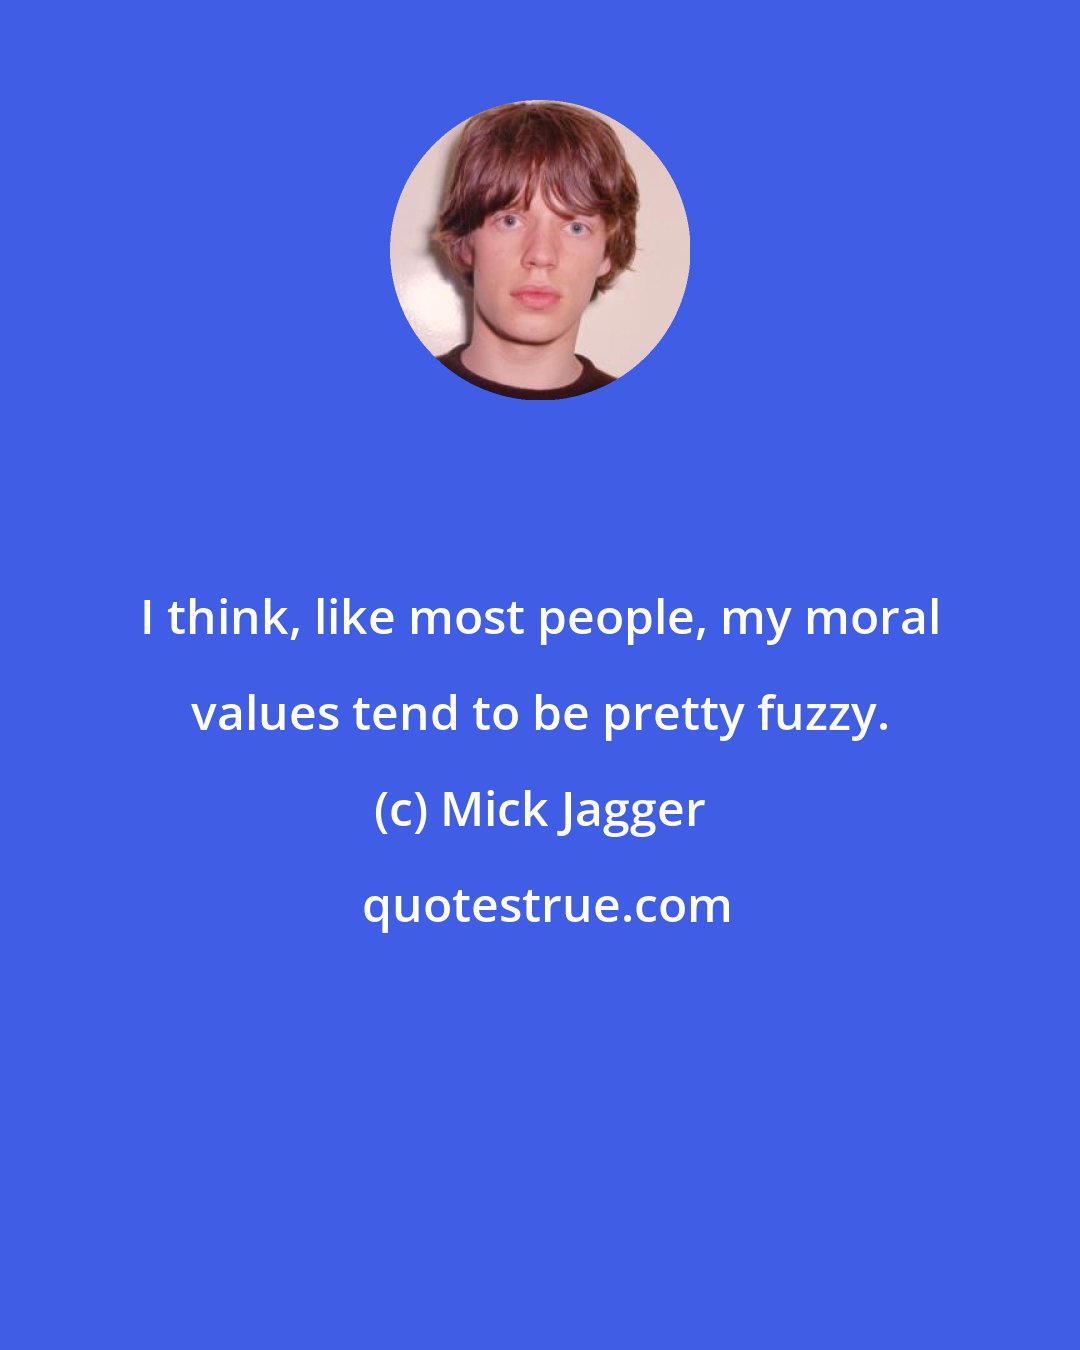 Mick Jagger: I think, like most people, my moral values tend to be pretty fuzzy.